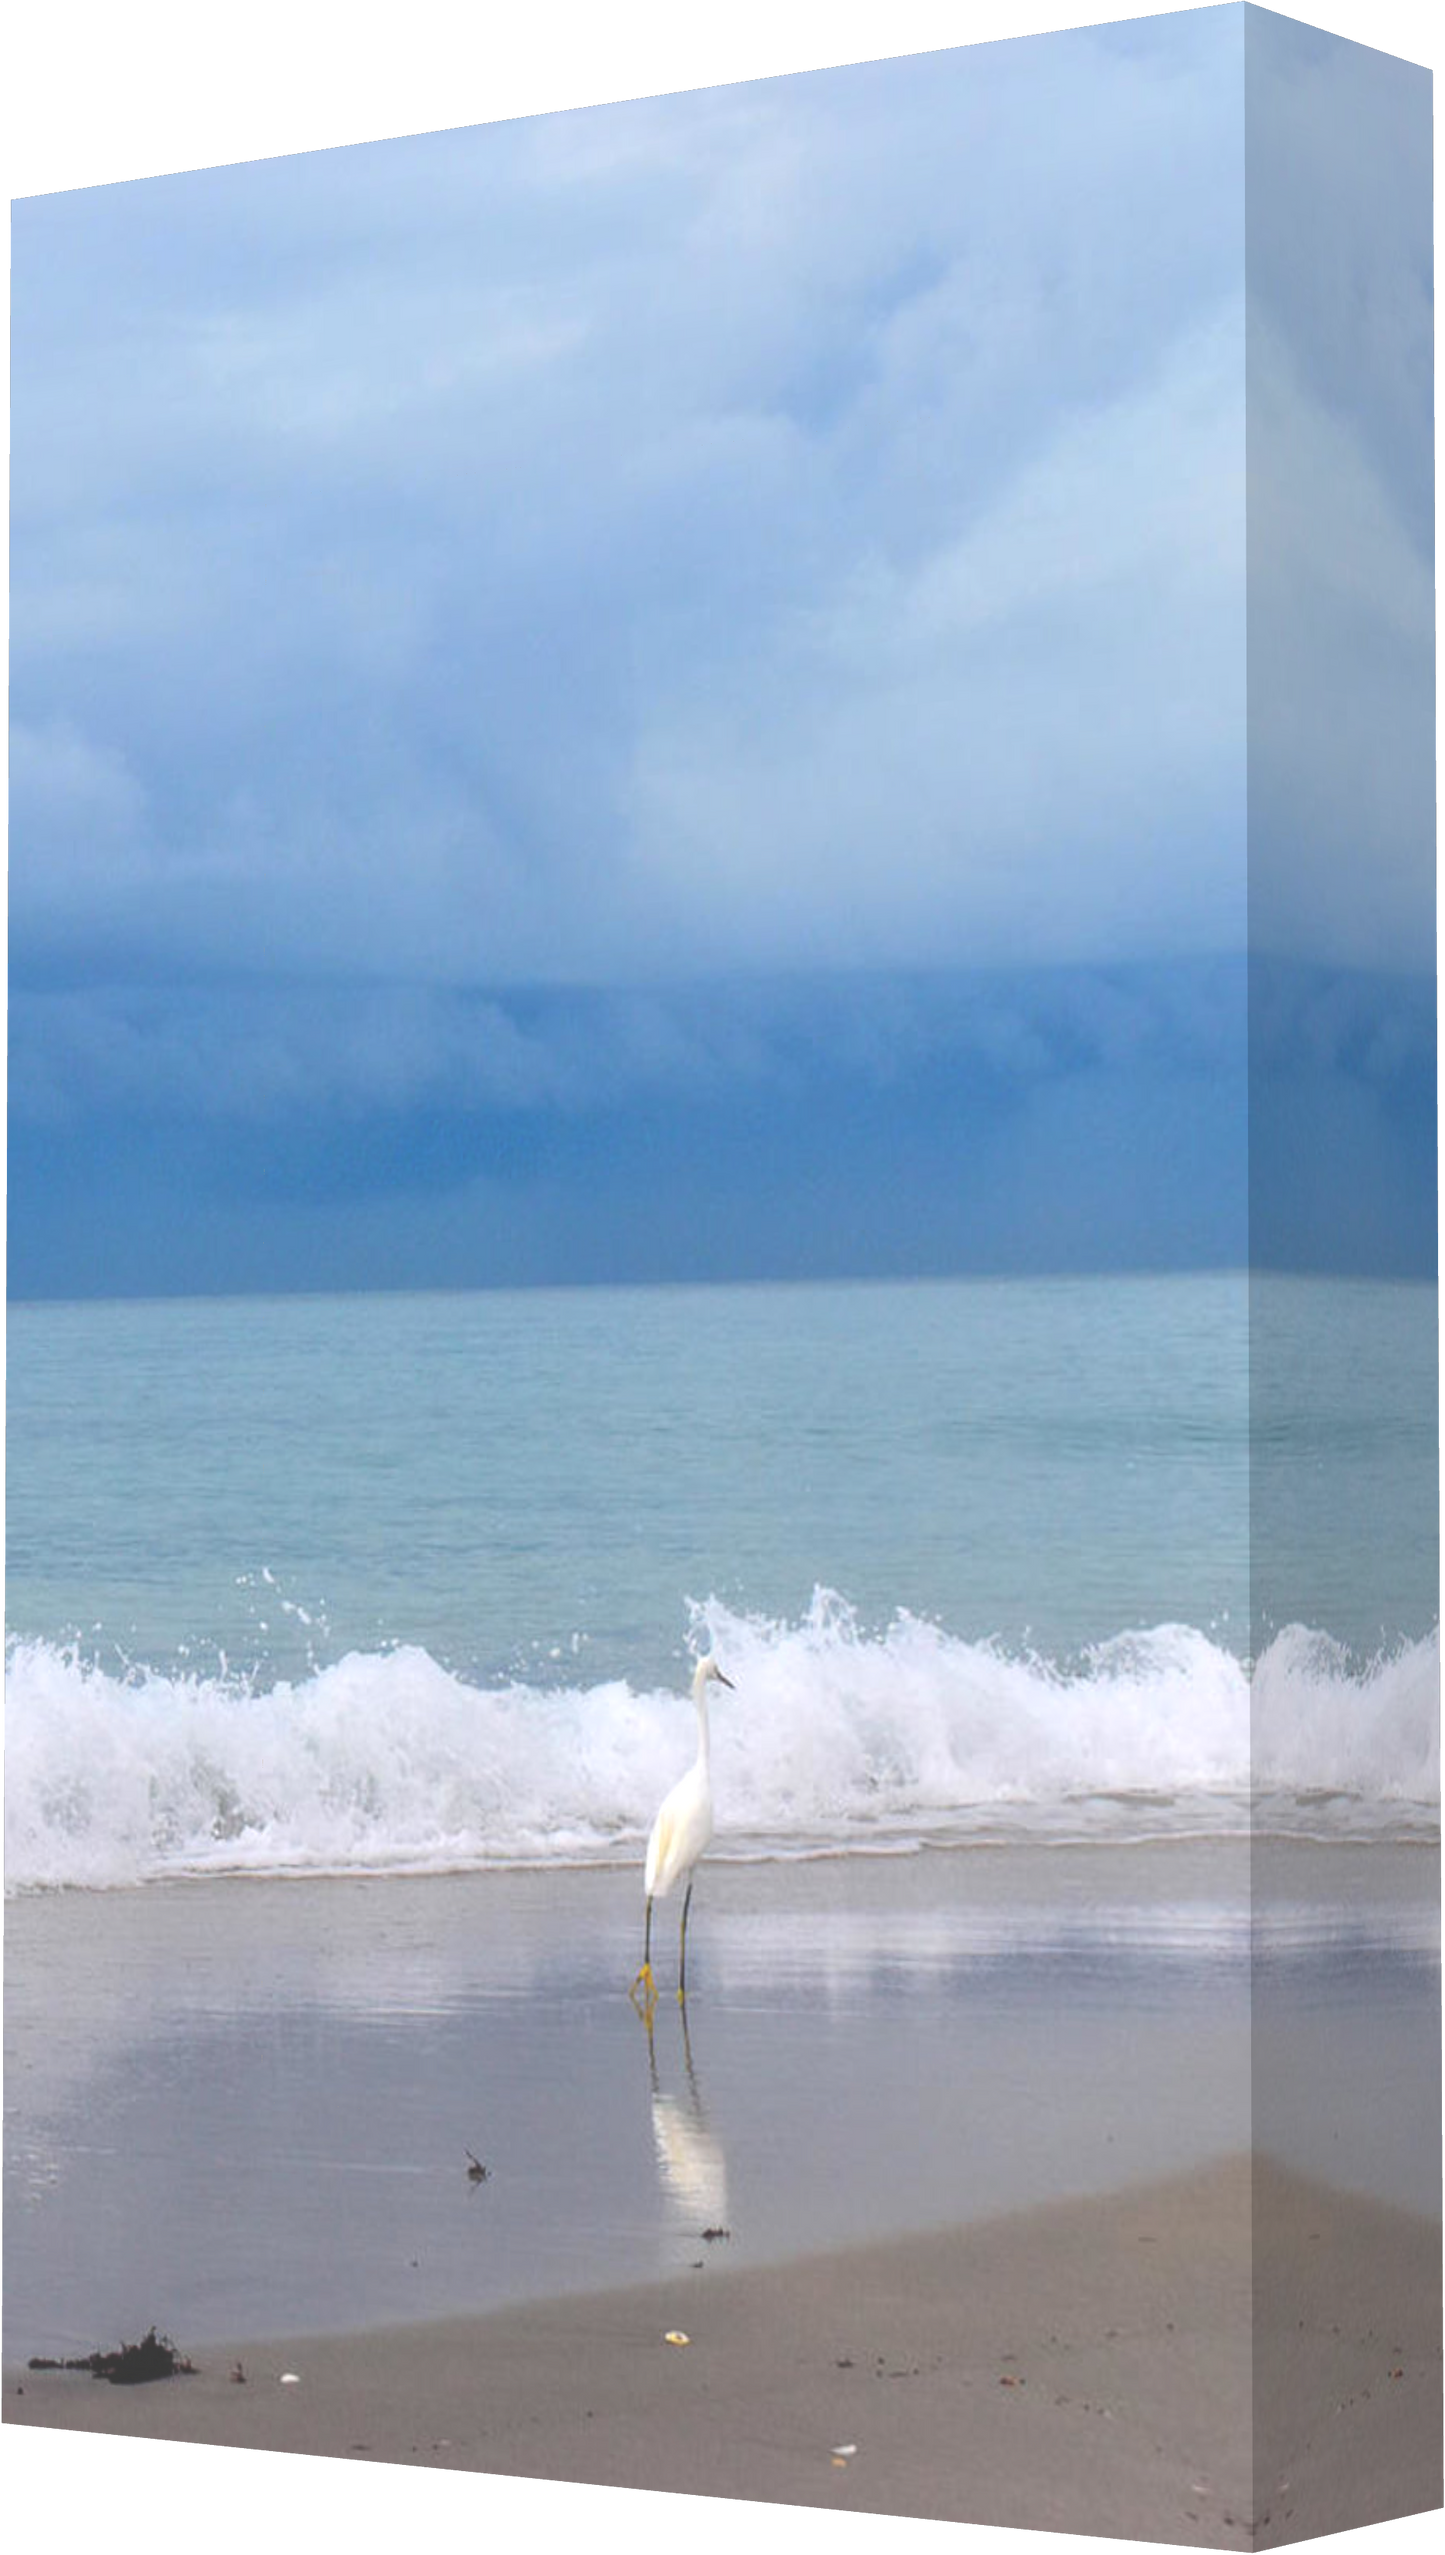 Egret Reflections at Seaside - Classic Canvas Print